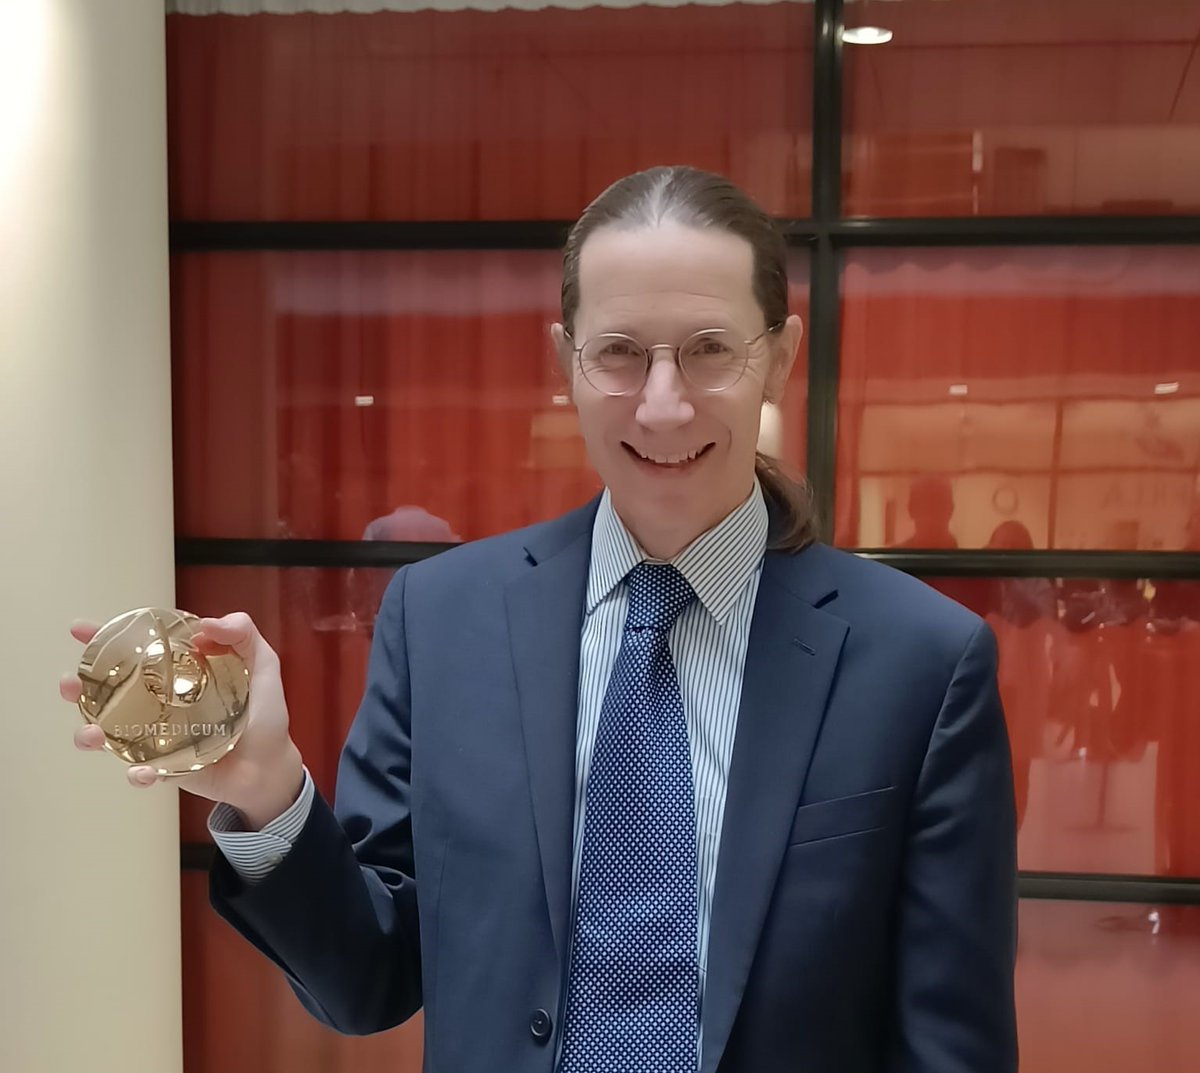 Our heartfelt congratulations to FIMM director @dalygene for being awarded the Biomedicum Helsinki Medal and for giving a great Biomedicum Helsinki Lecture 2022: ”Human Genetics in Finland: past, present, and future” today.